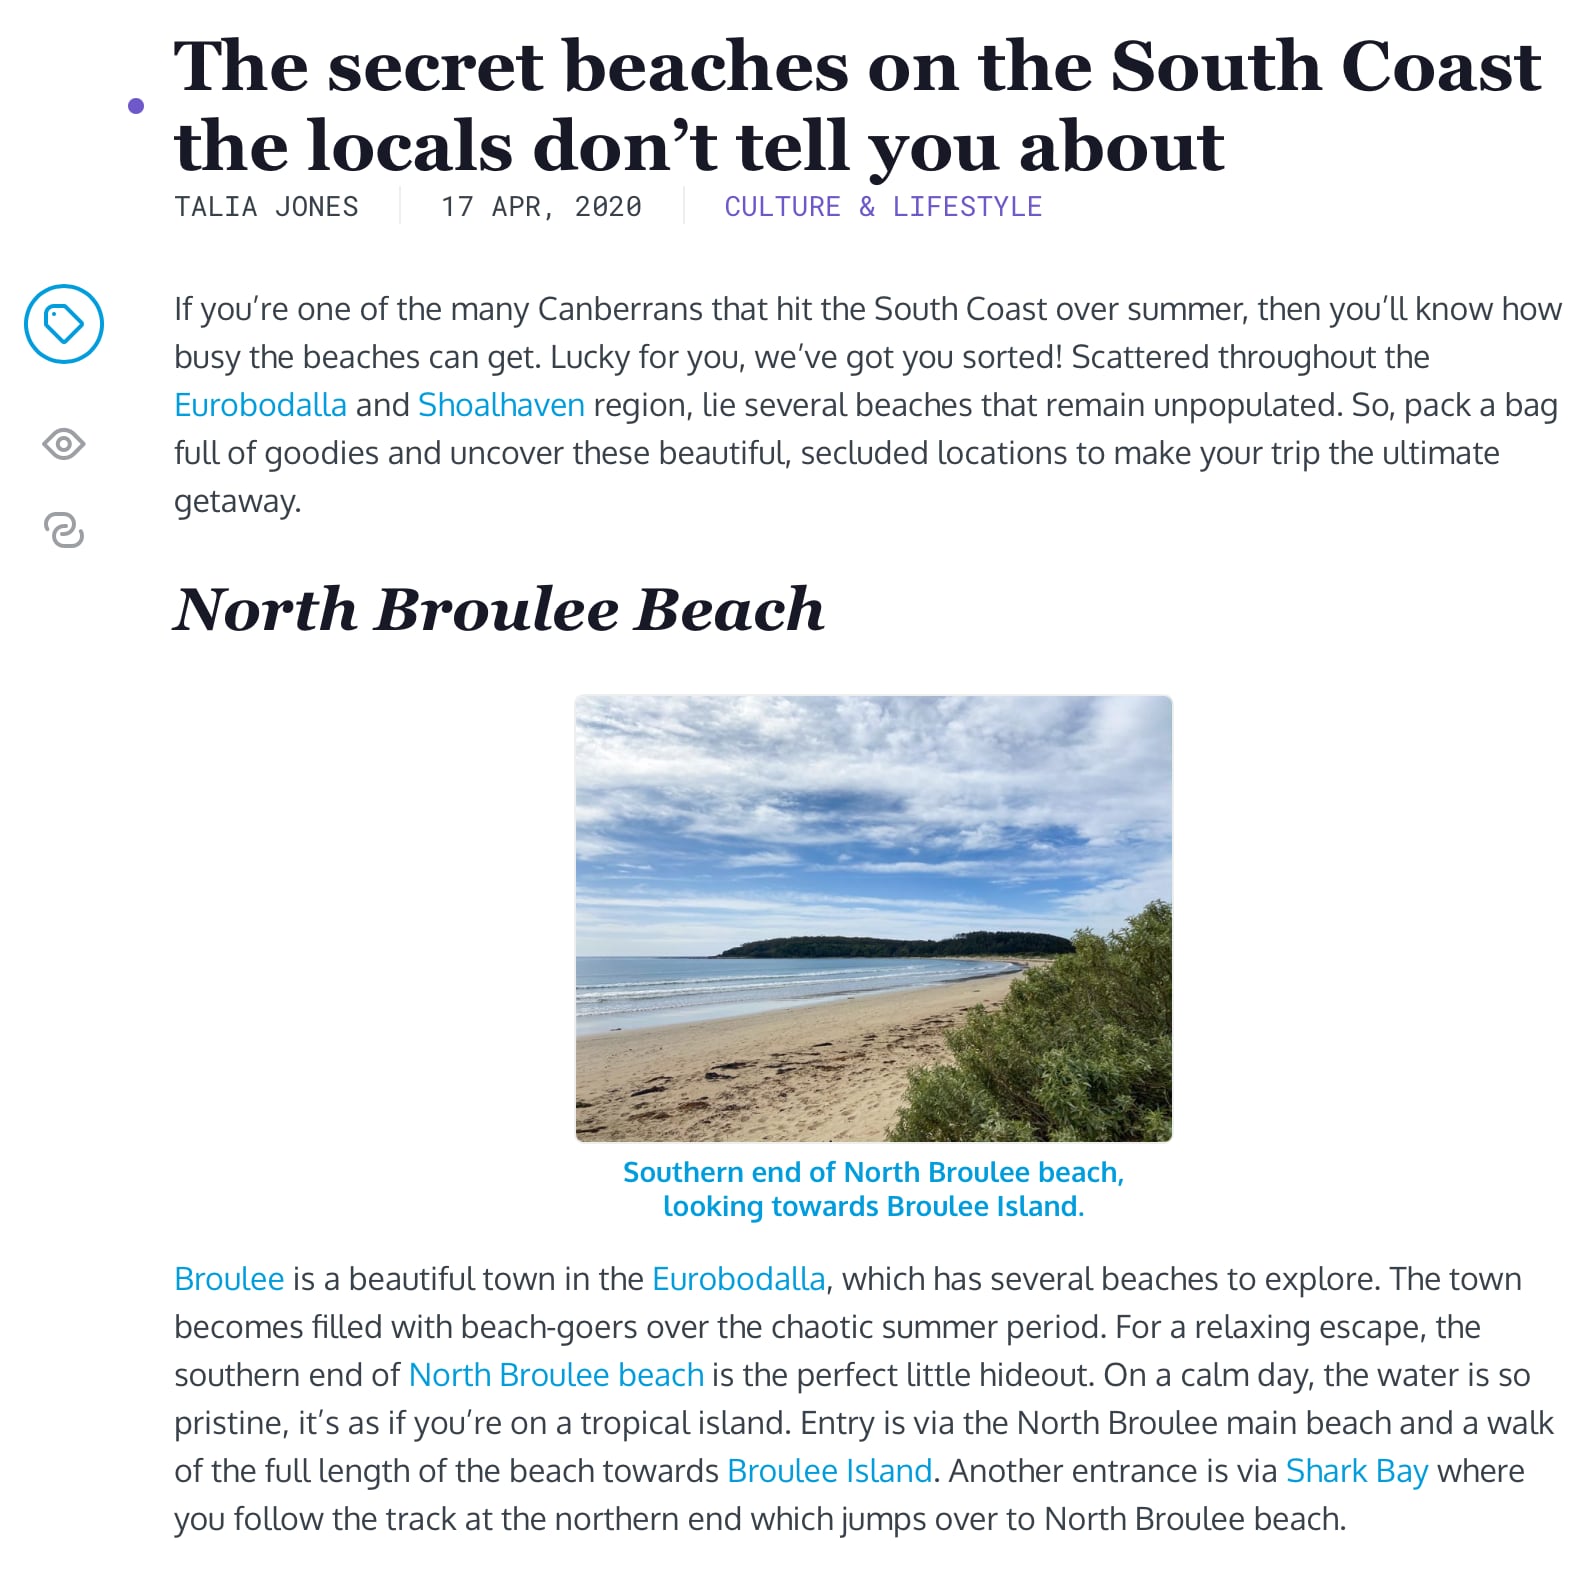 Screenshot of 'The secret beaches on the South Coast the locals don’t tell you about'